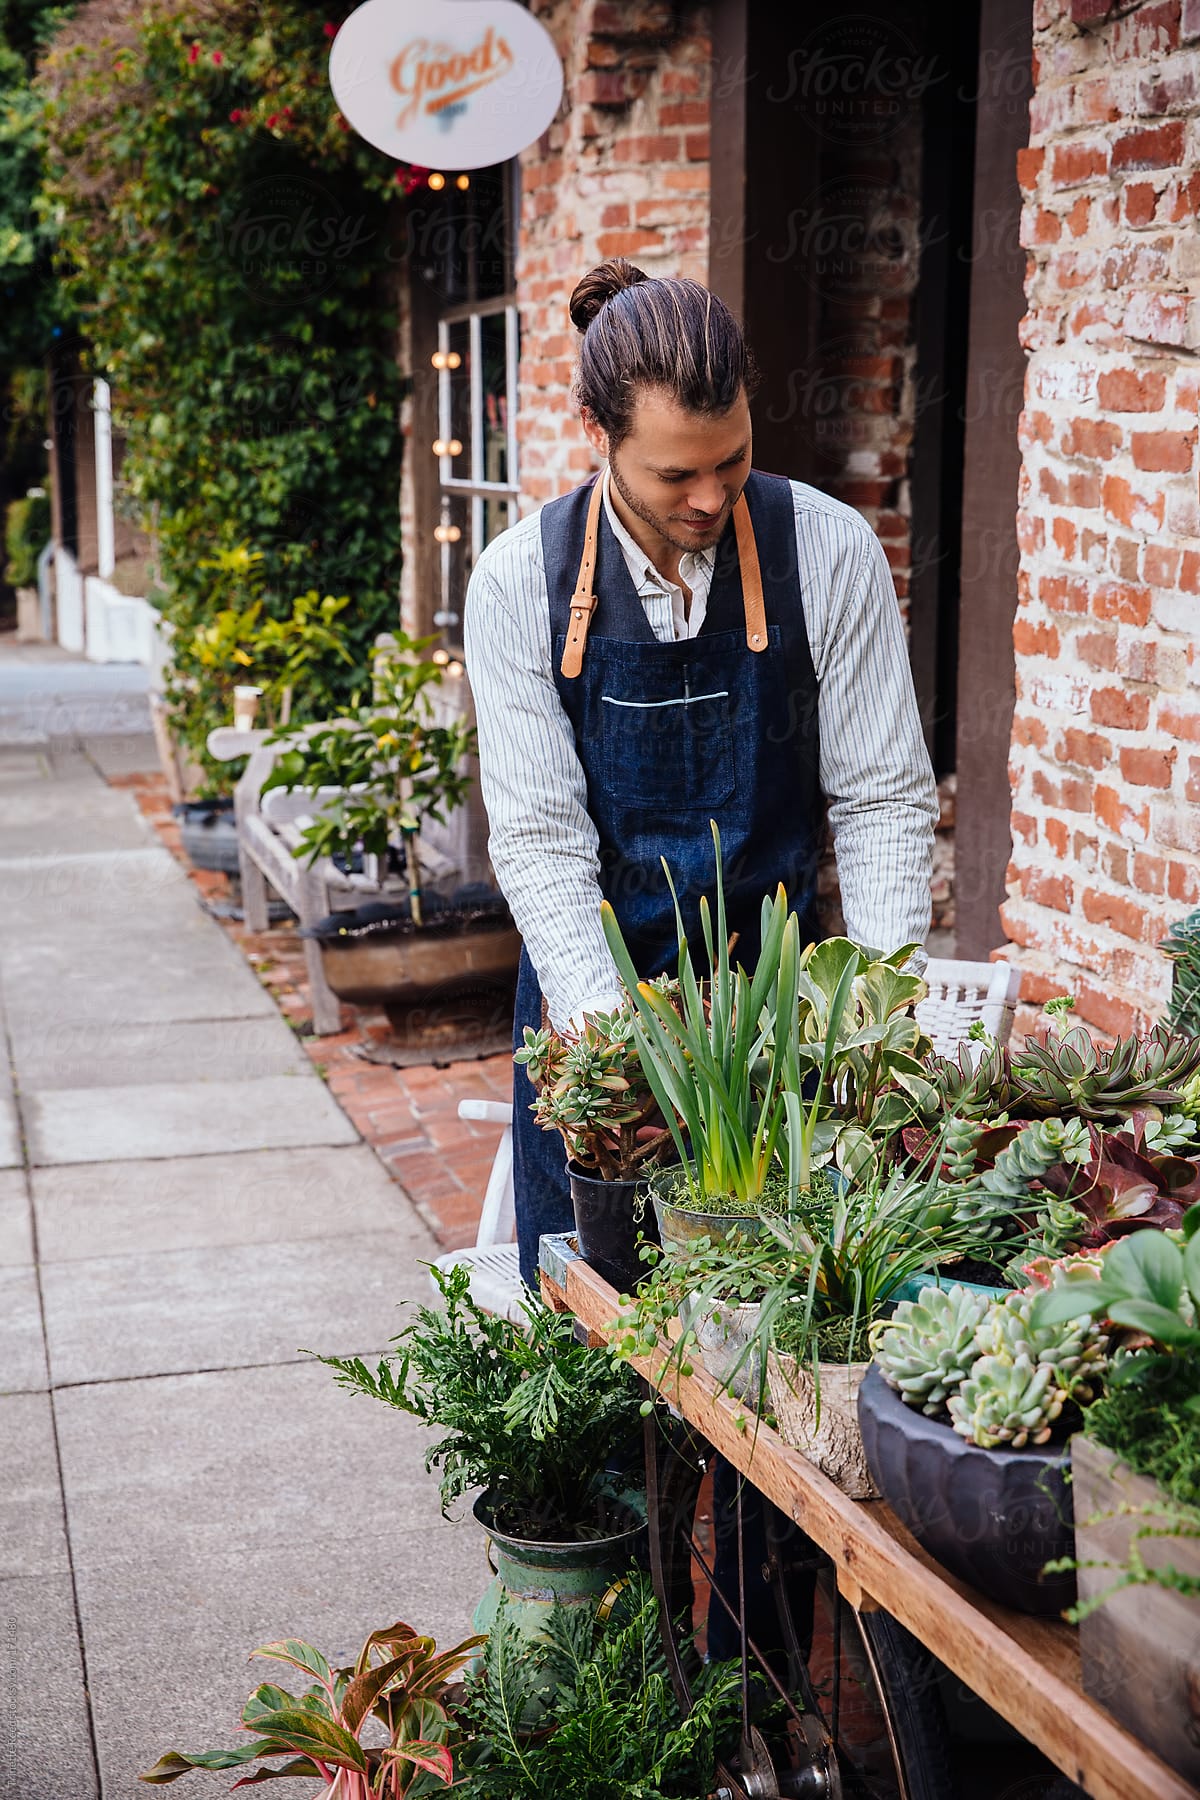 Small business owner arranging plants in front of store